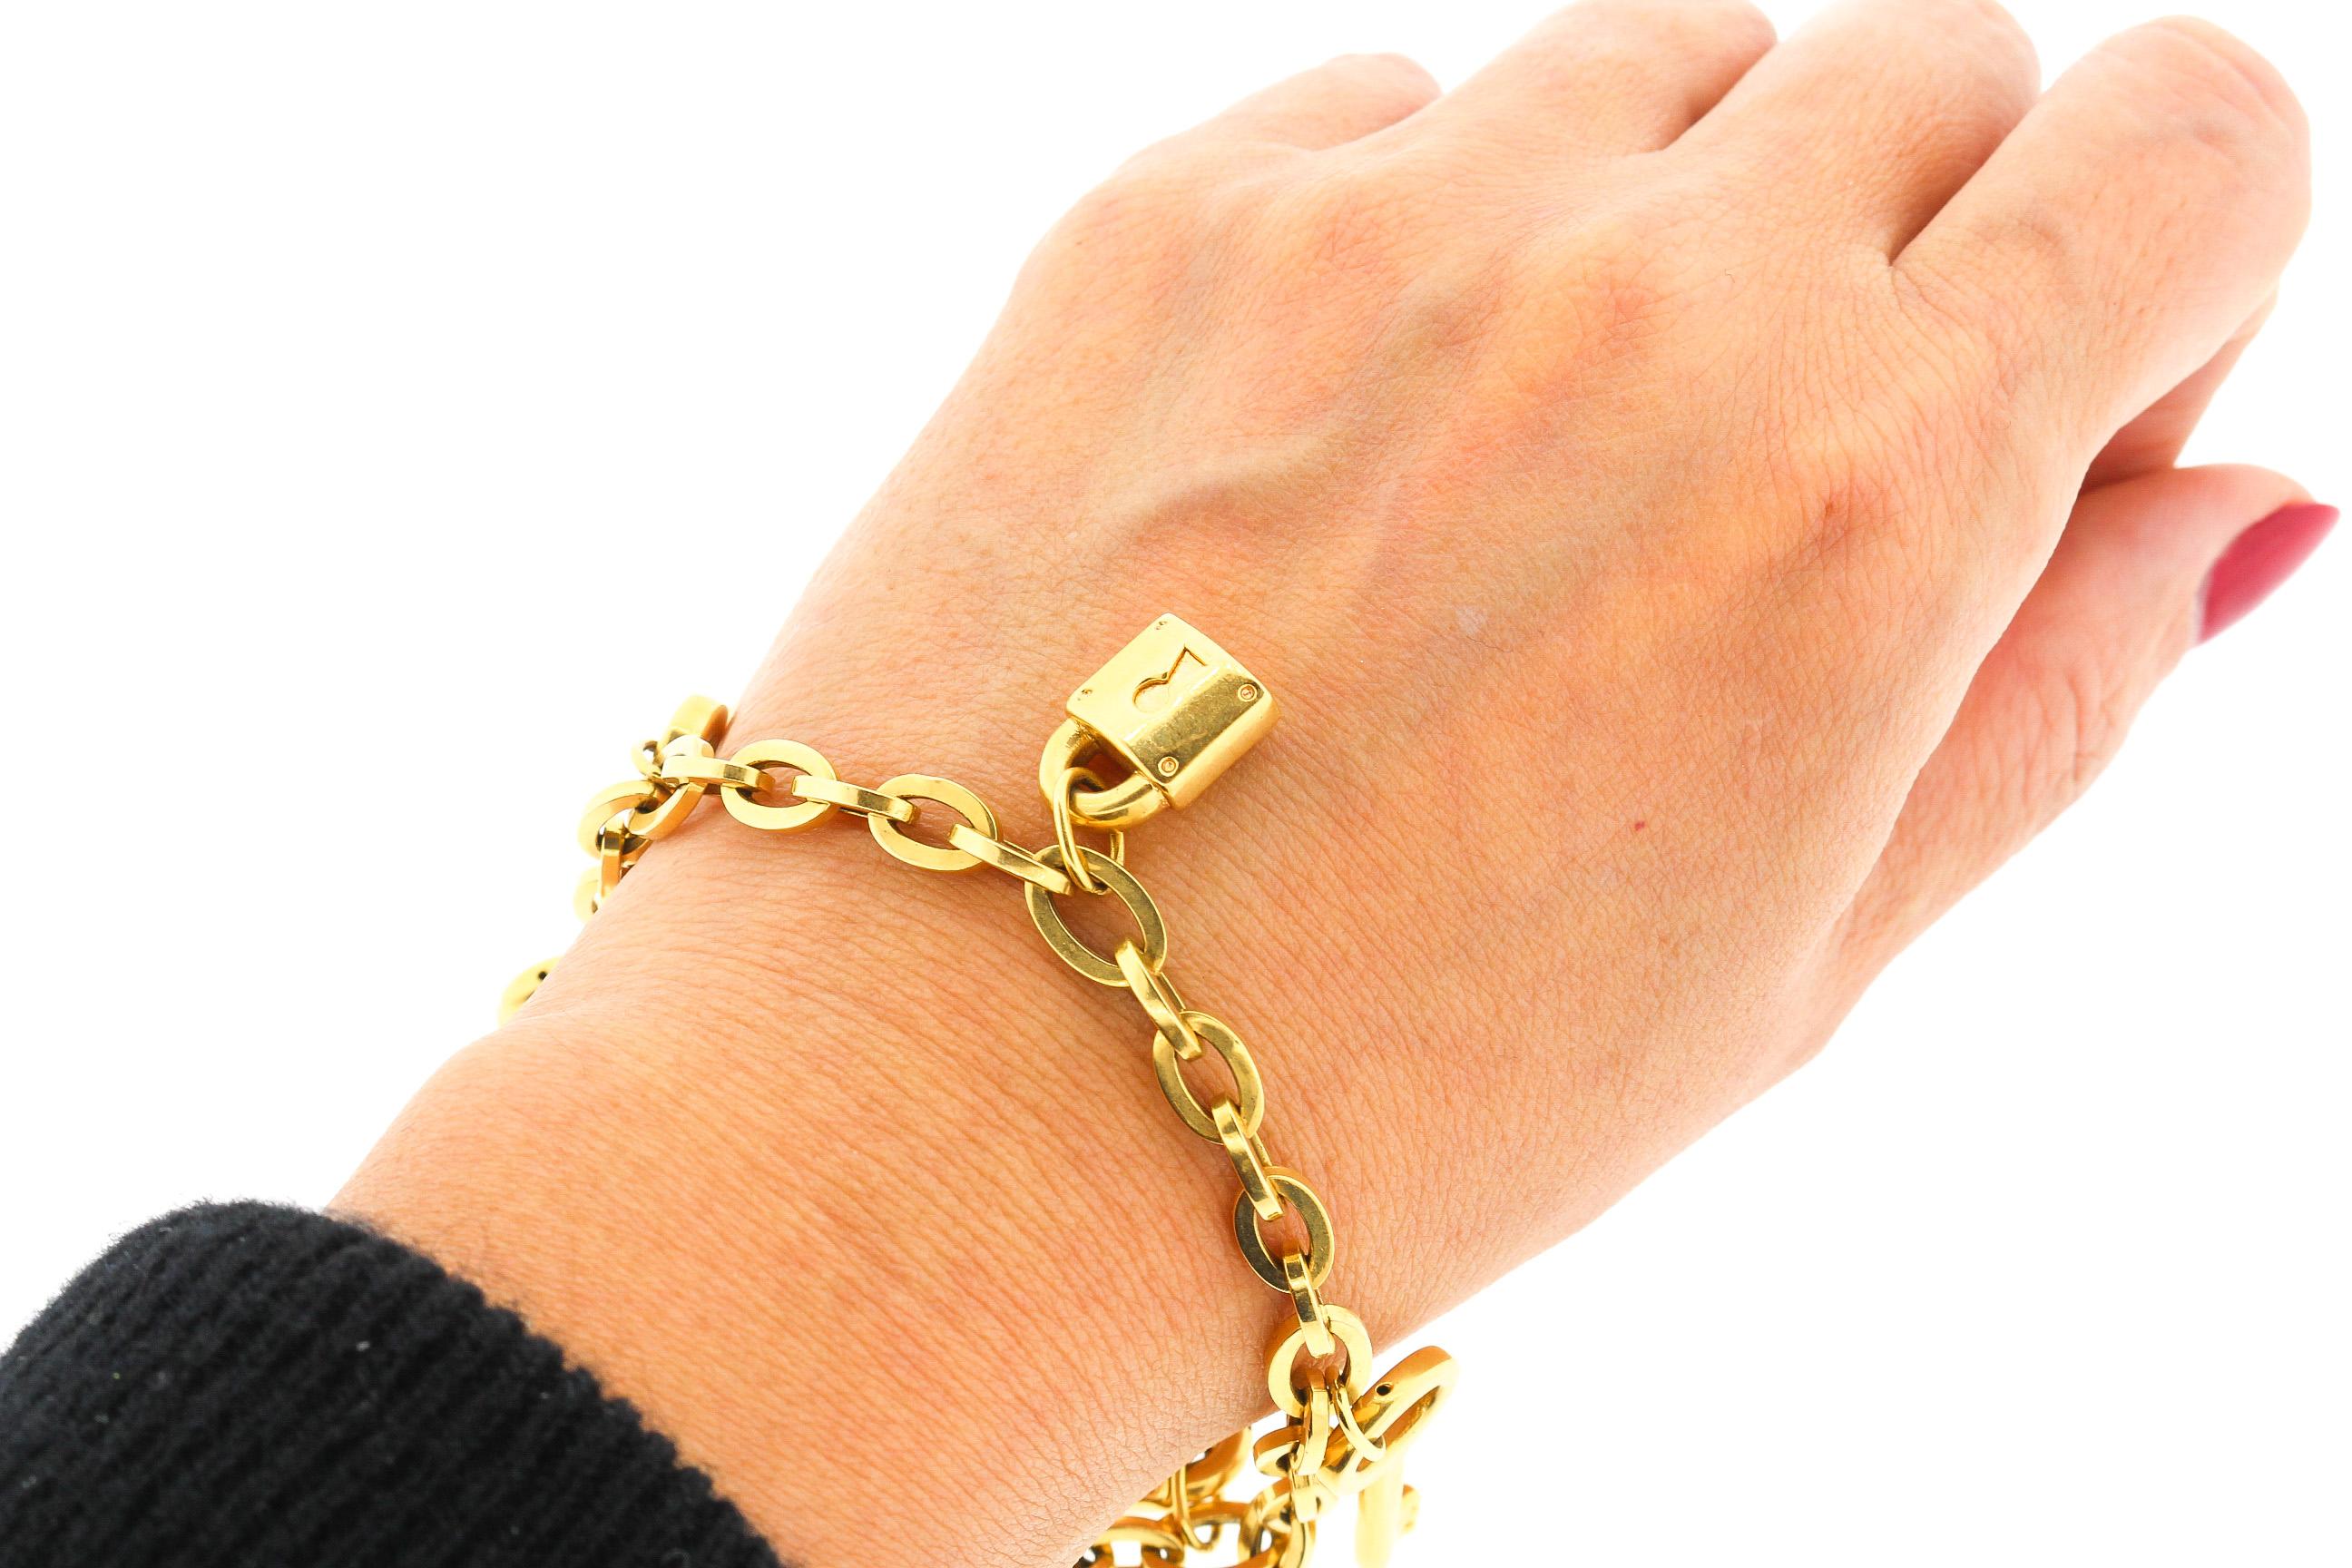 A wearable hollow form gold 18k yellow gold link charm bracelet with alternating key and padlock charms. The bracelet has Italian hallmarks and was likely made in the 1990s. The oval link chain of the bracelet is very attractive and the charms well